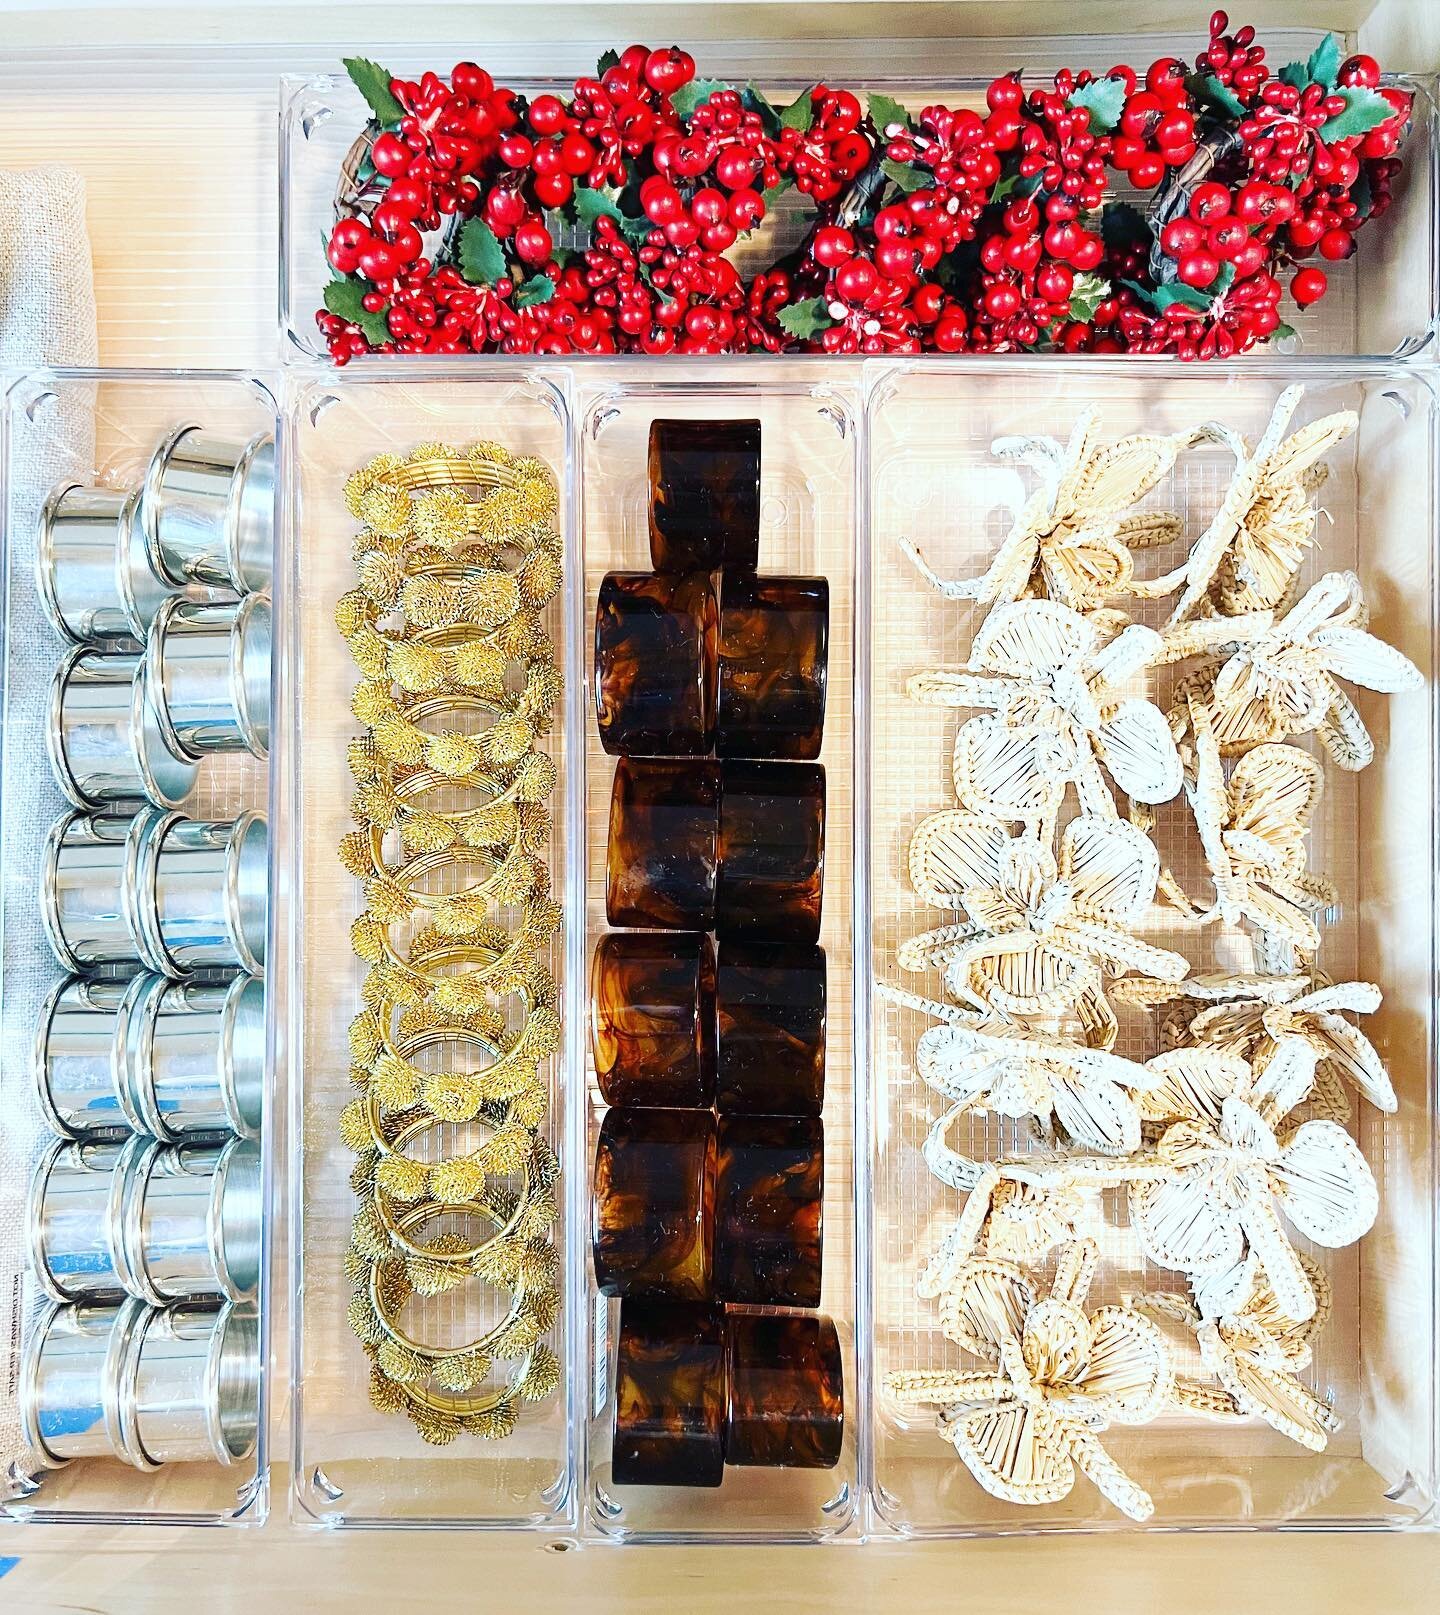 ✨ r i n g s ✨
Are you hosting any holiday parties this season? Get all of your accessories organized with our favorite drawer inserts from @thecontainerstore!